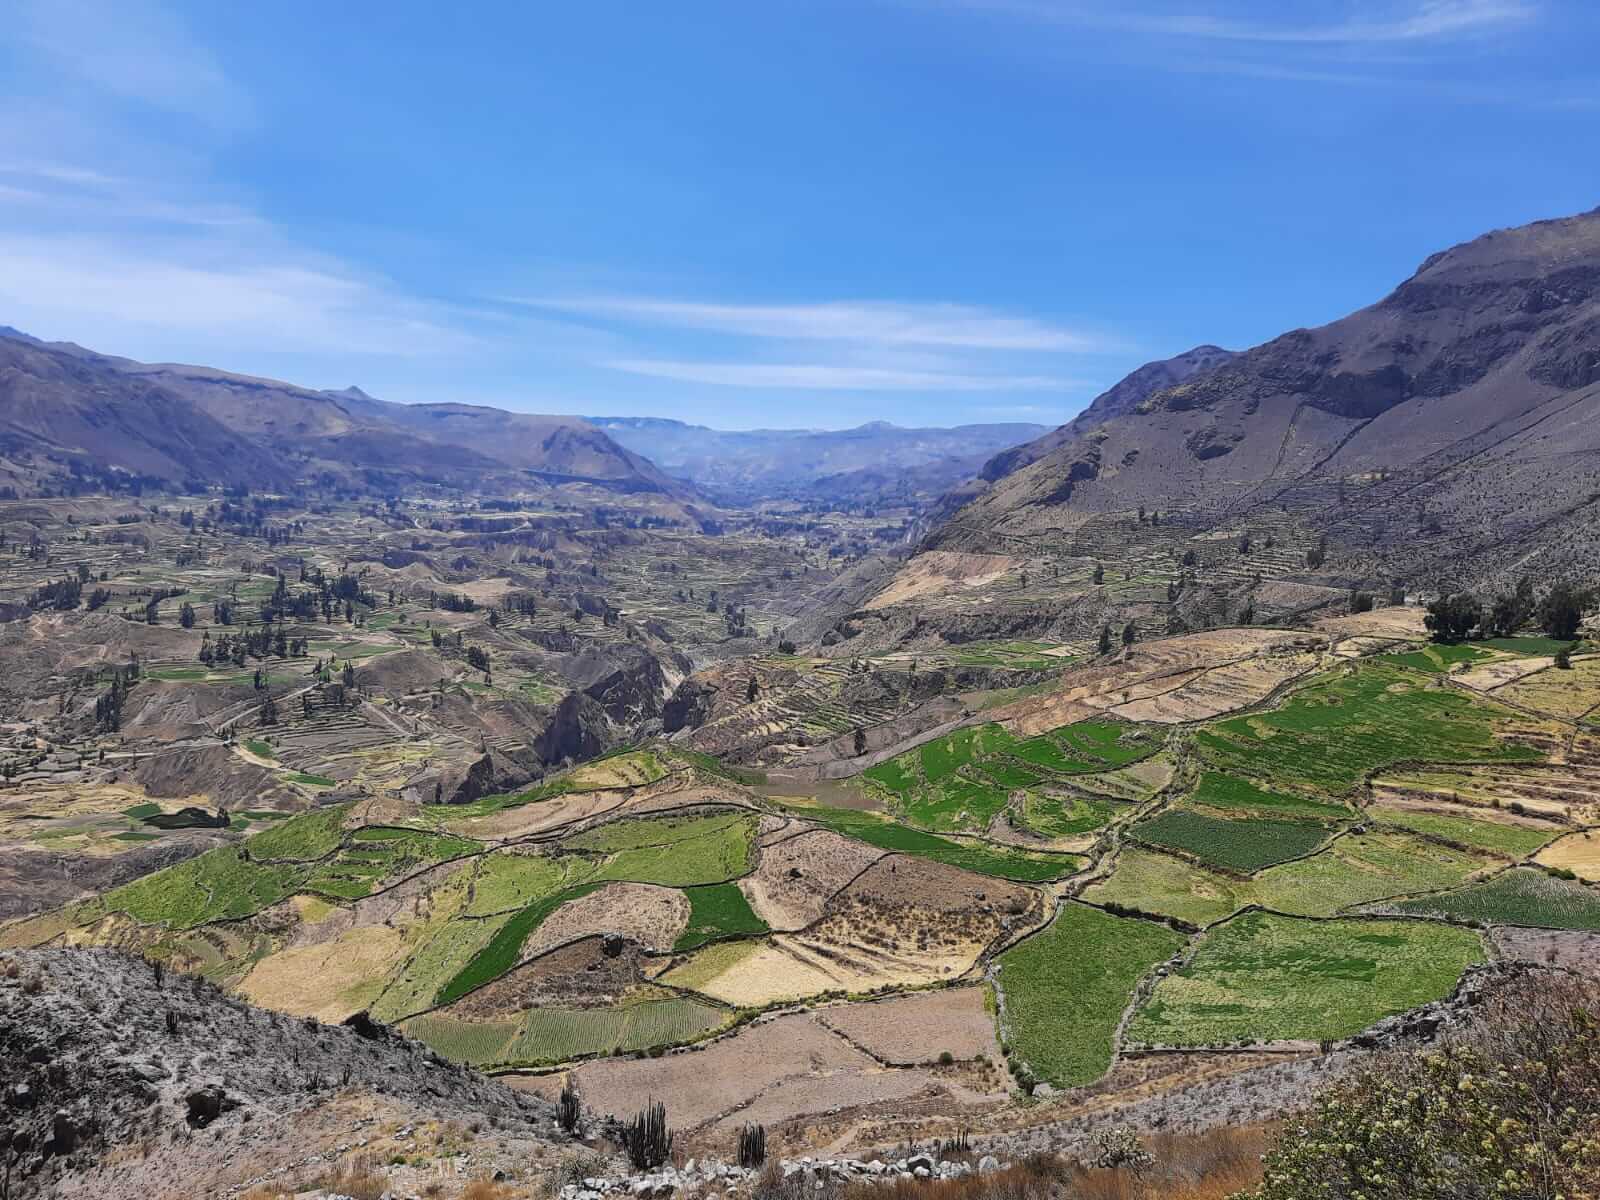 A Covid-free environment in the Colca Canyon of Peru | RESPONSible Travel Peru